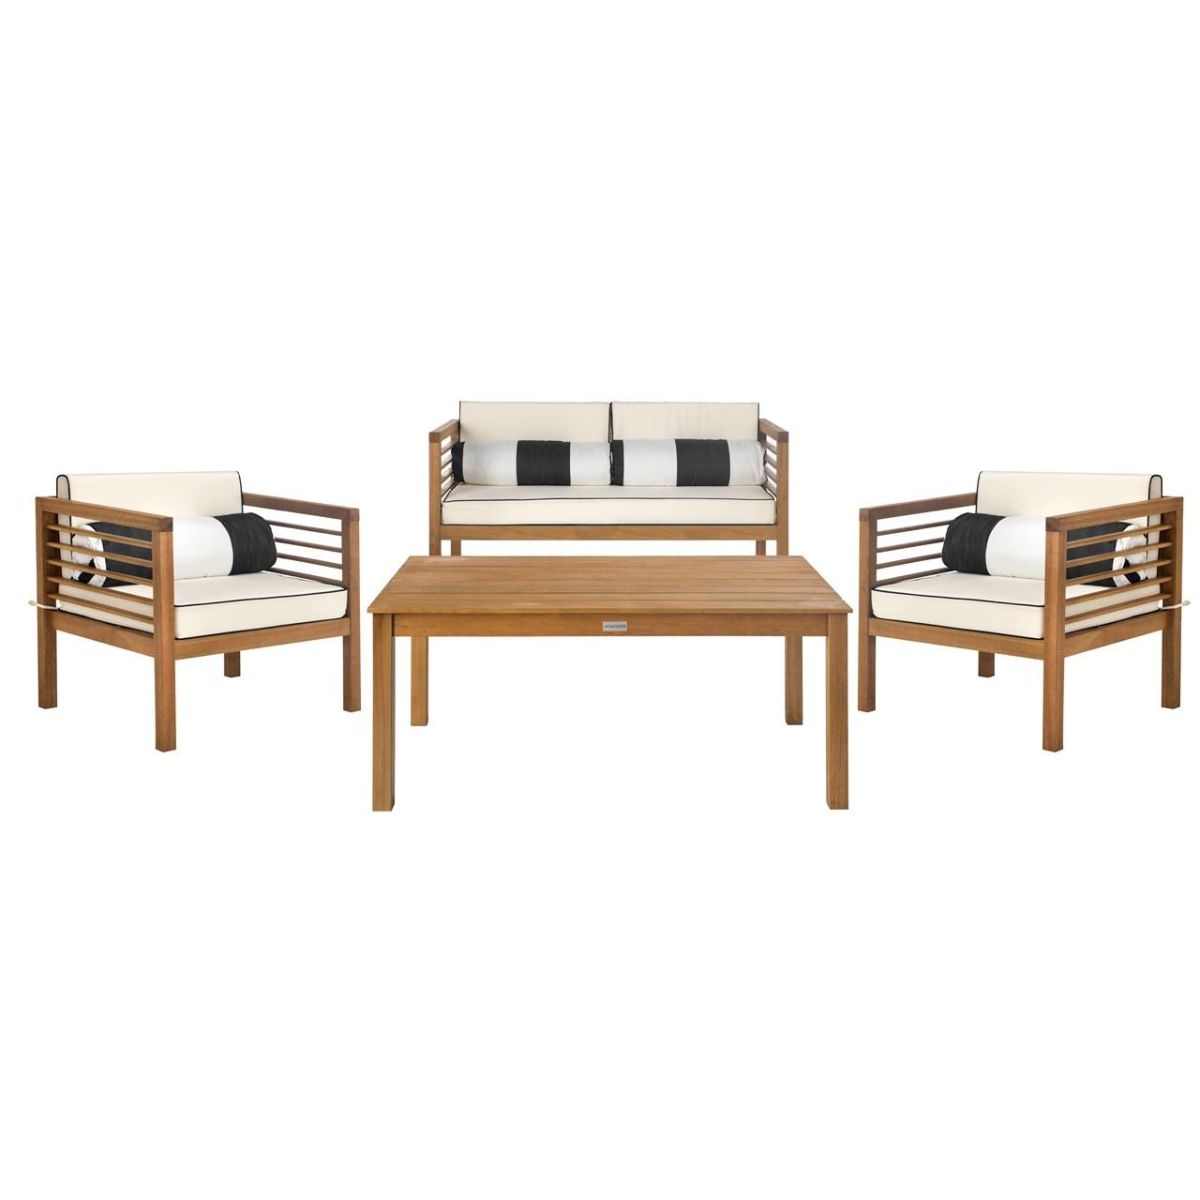 Safavieh Alda 4 Pc Outdoor Set With Accent Pillows , PAT7033 - Natural/Black/White